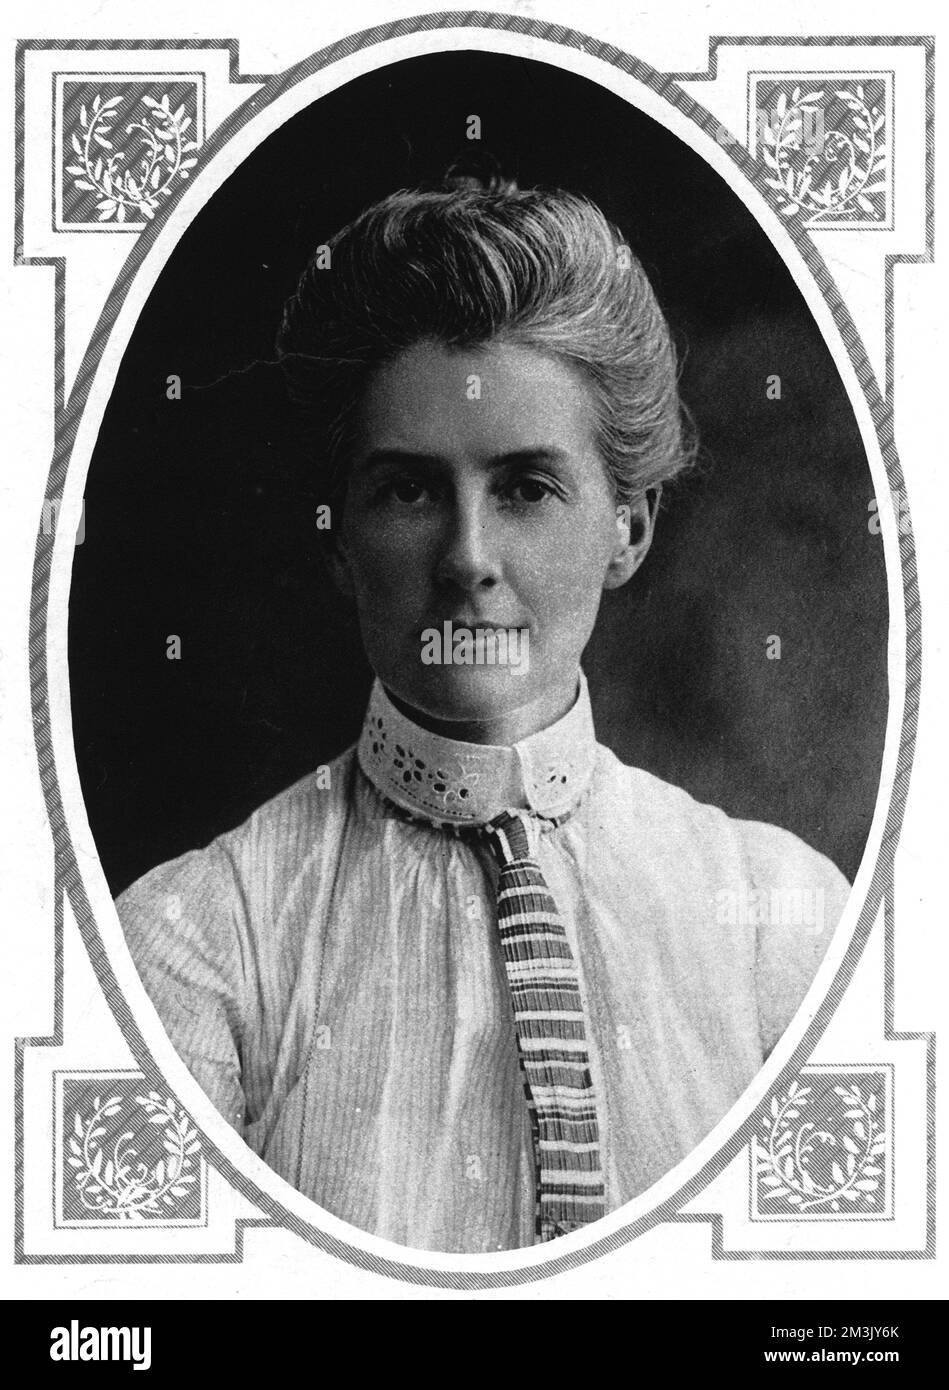 Edith Cavell was executed during World War One, with the charge of assisting allied soldiers to escape. She worked for the Red Cross in a Belgium hospital where many of the Allied soldiers treated there managed to escape to Holland.  In 1915 German authorities arrested Cavell and kept her in solitary confinement until she gave a false confession. Her execution received worldwide sympathetic media coverage.  1915 Stock Photo